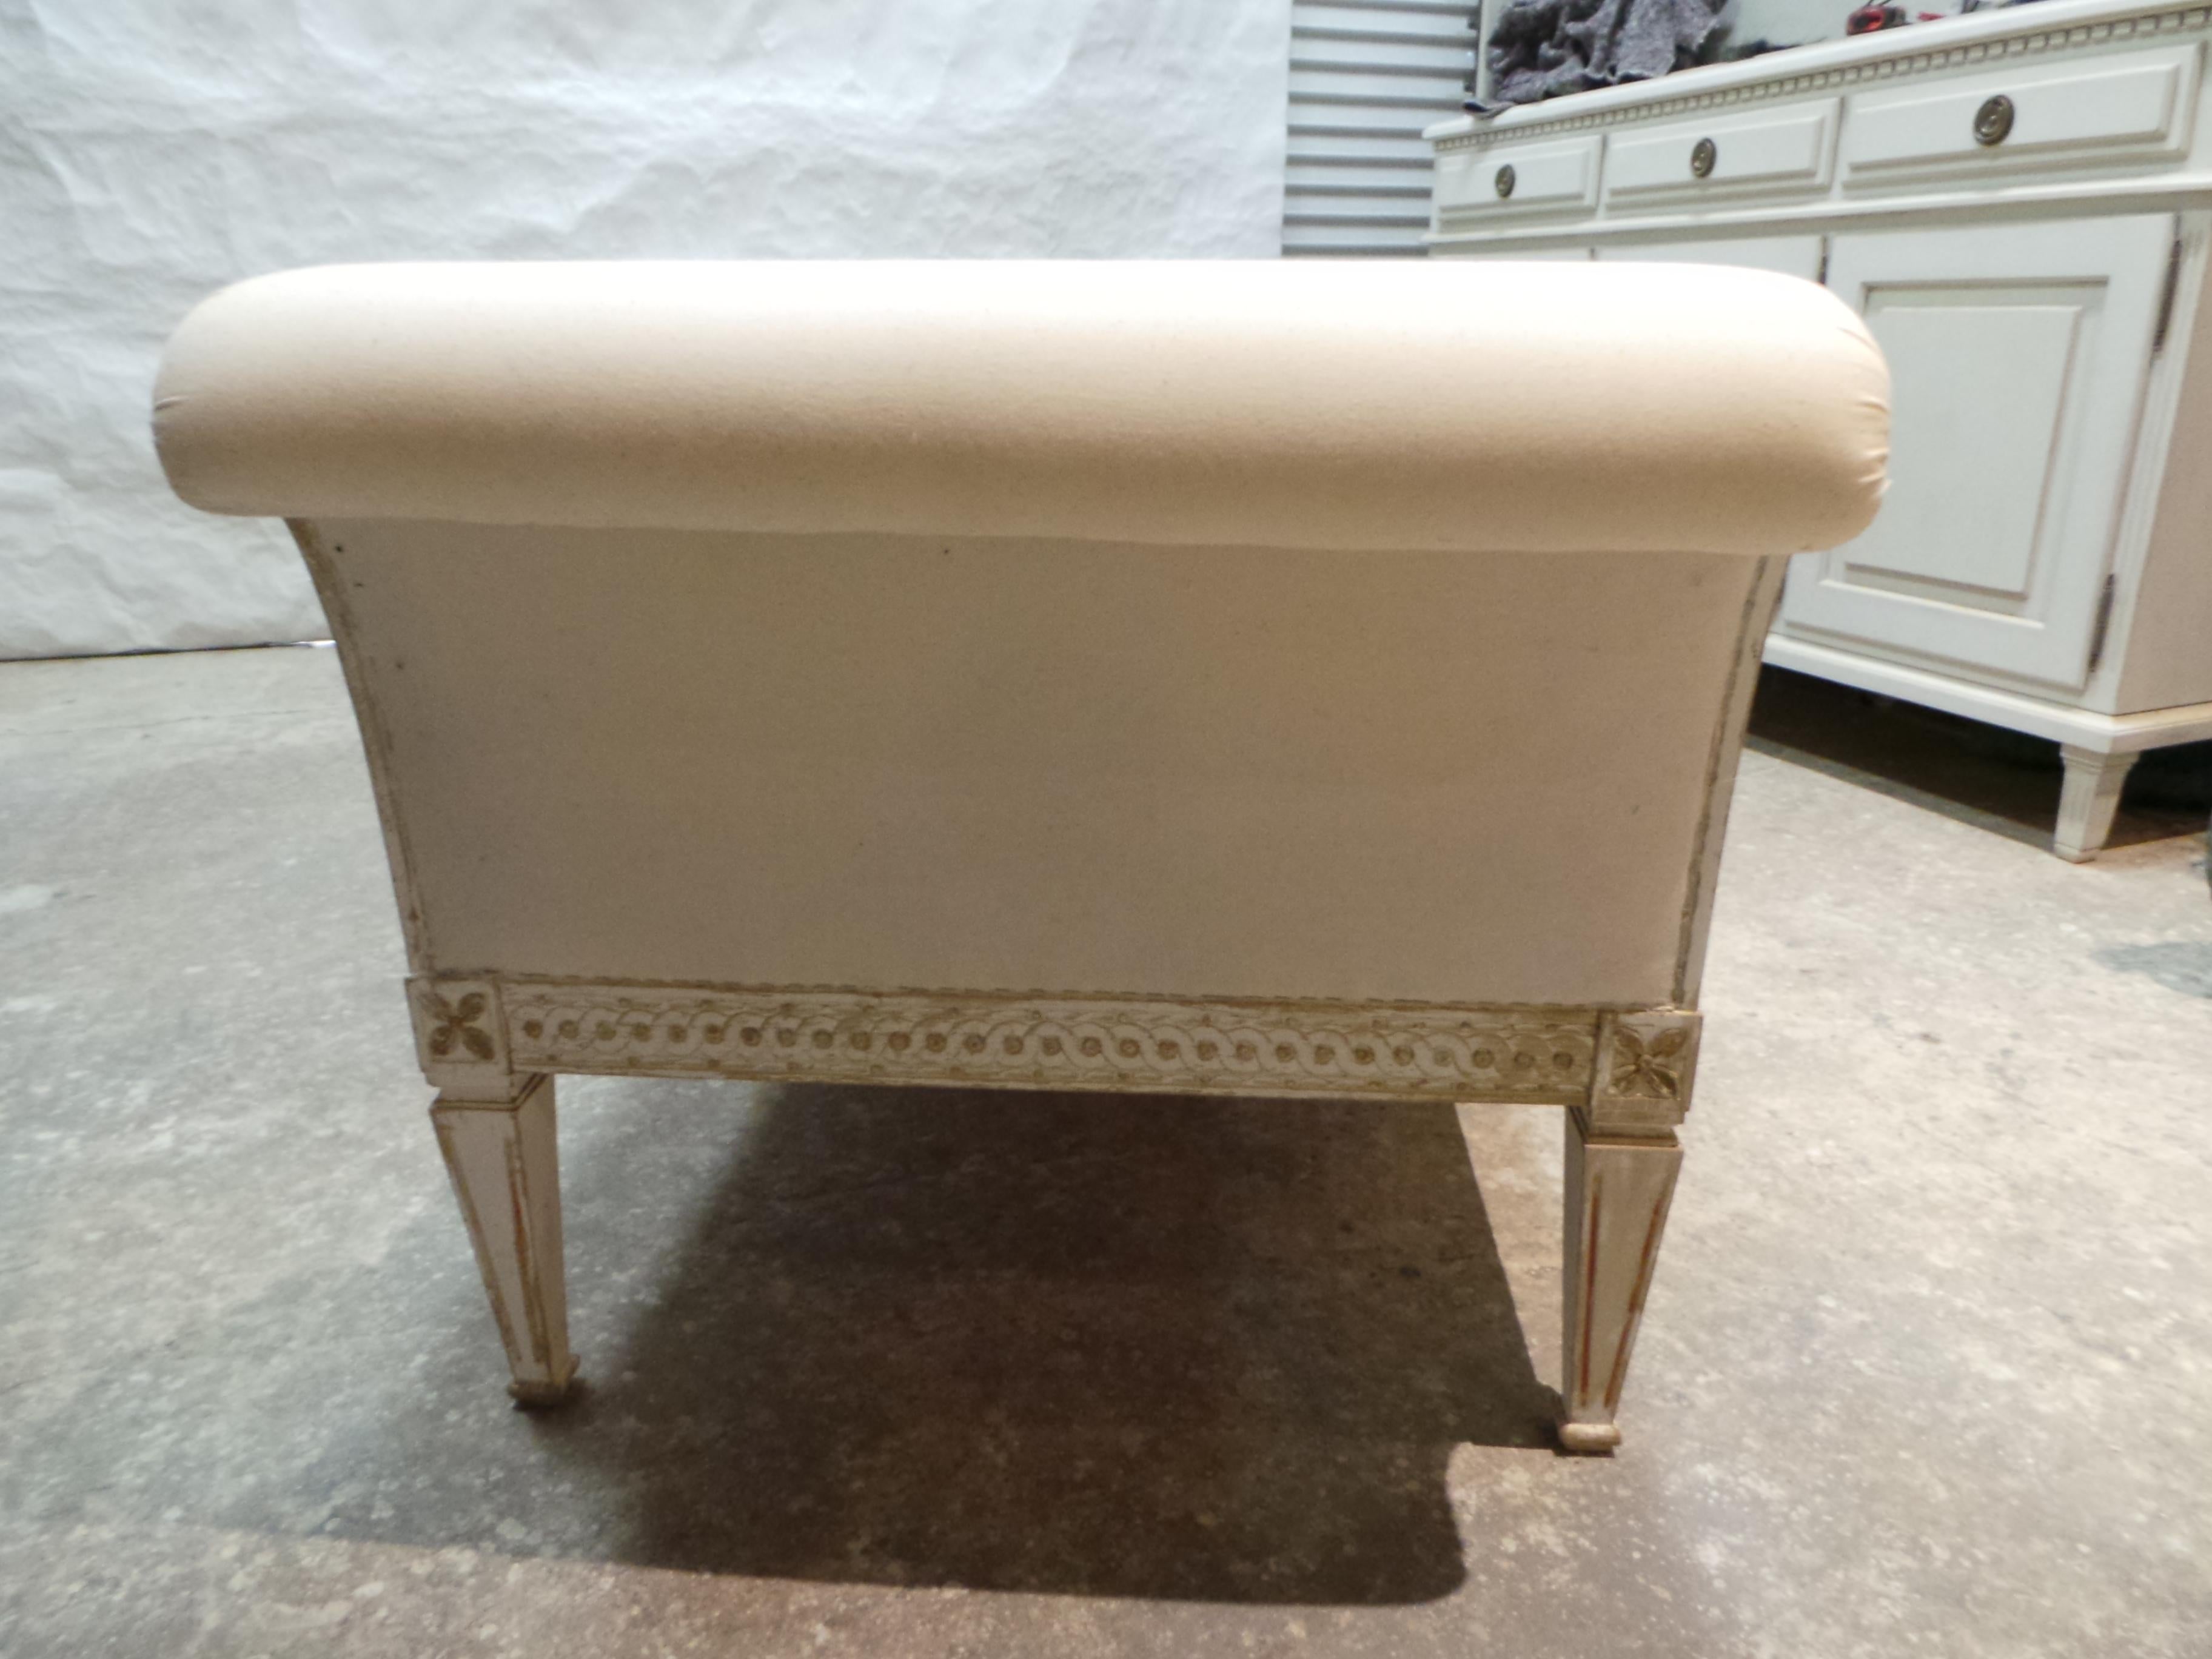 Rare Original Painted Swedish Gustavian Chaise Lounge For Sale 4